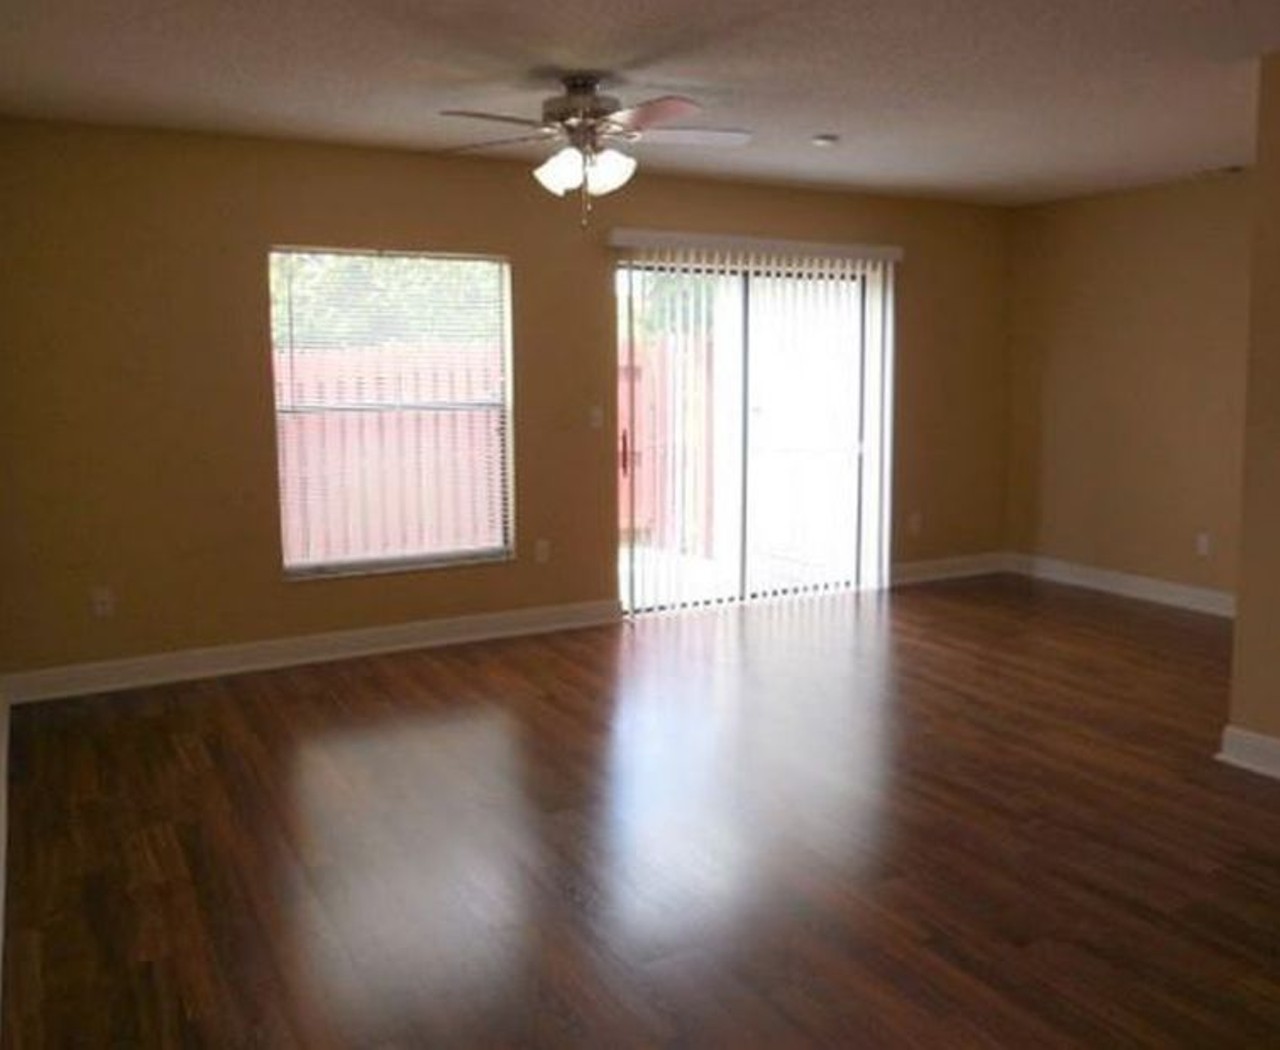 6229 Yorktown Dr, Orlando
$1,200/mo
2 bed, 2.5 bath, 1,227 sqft
This is an awesome living room area with the wood floors and axis to the the outdoor, patio area.